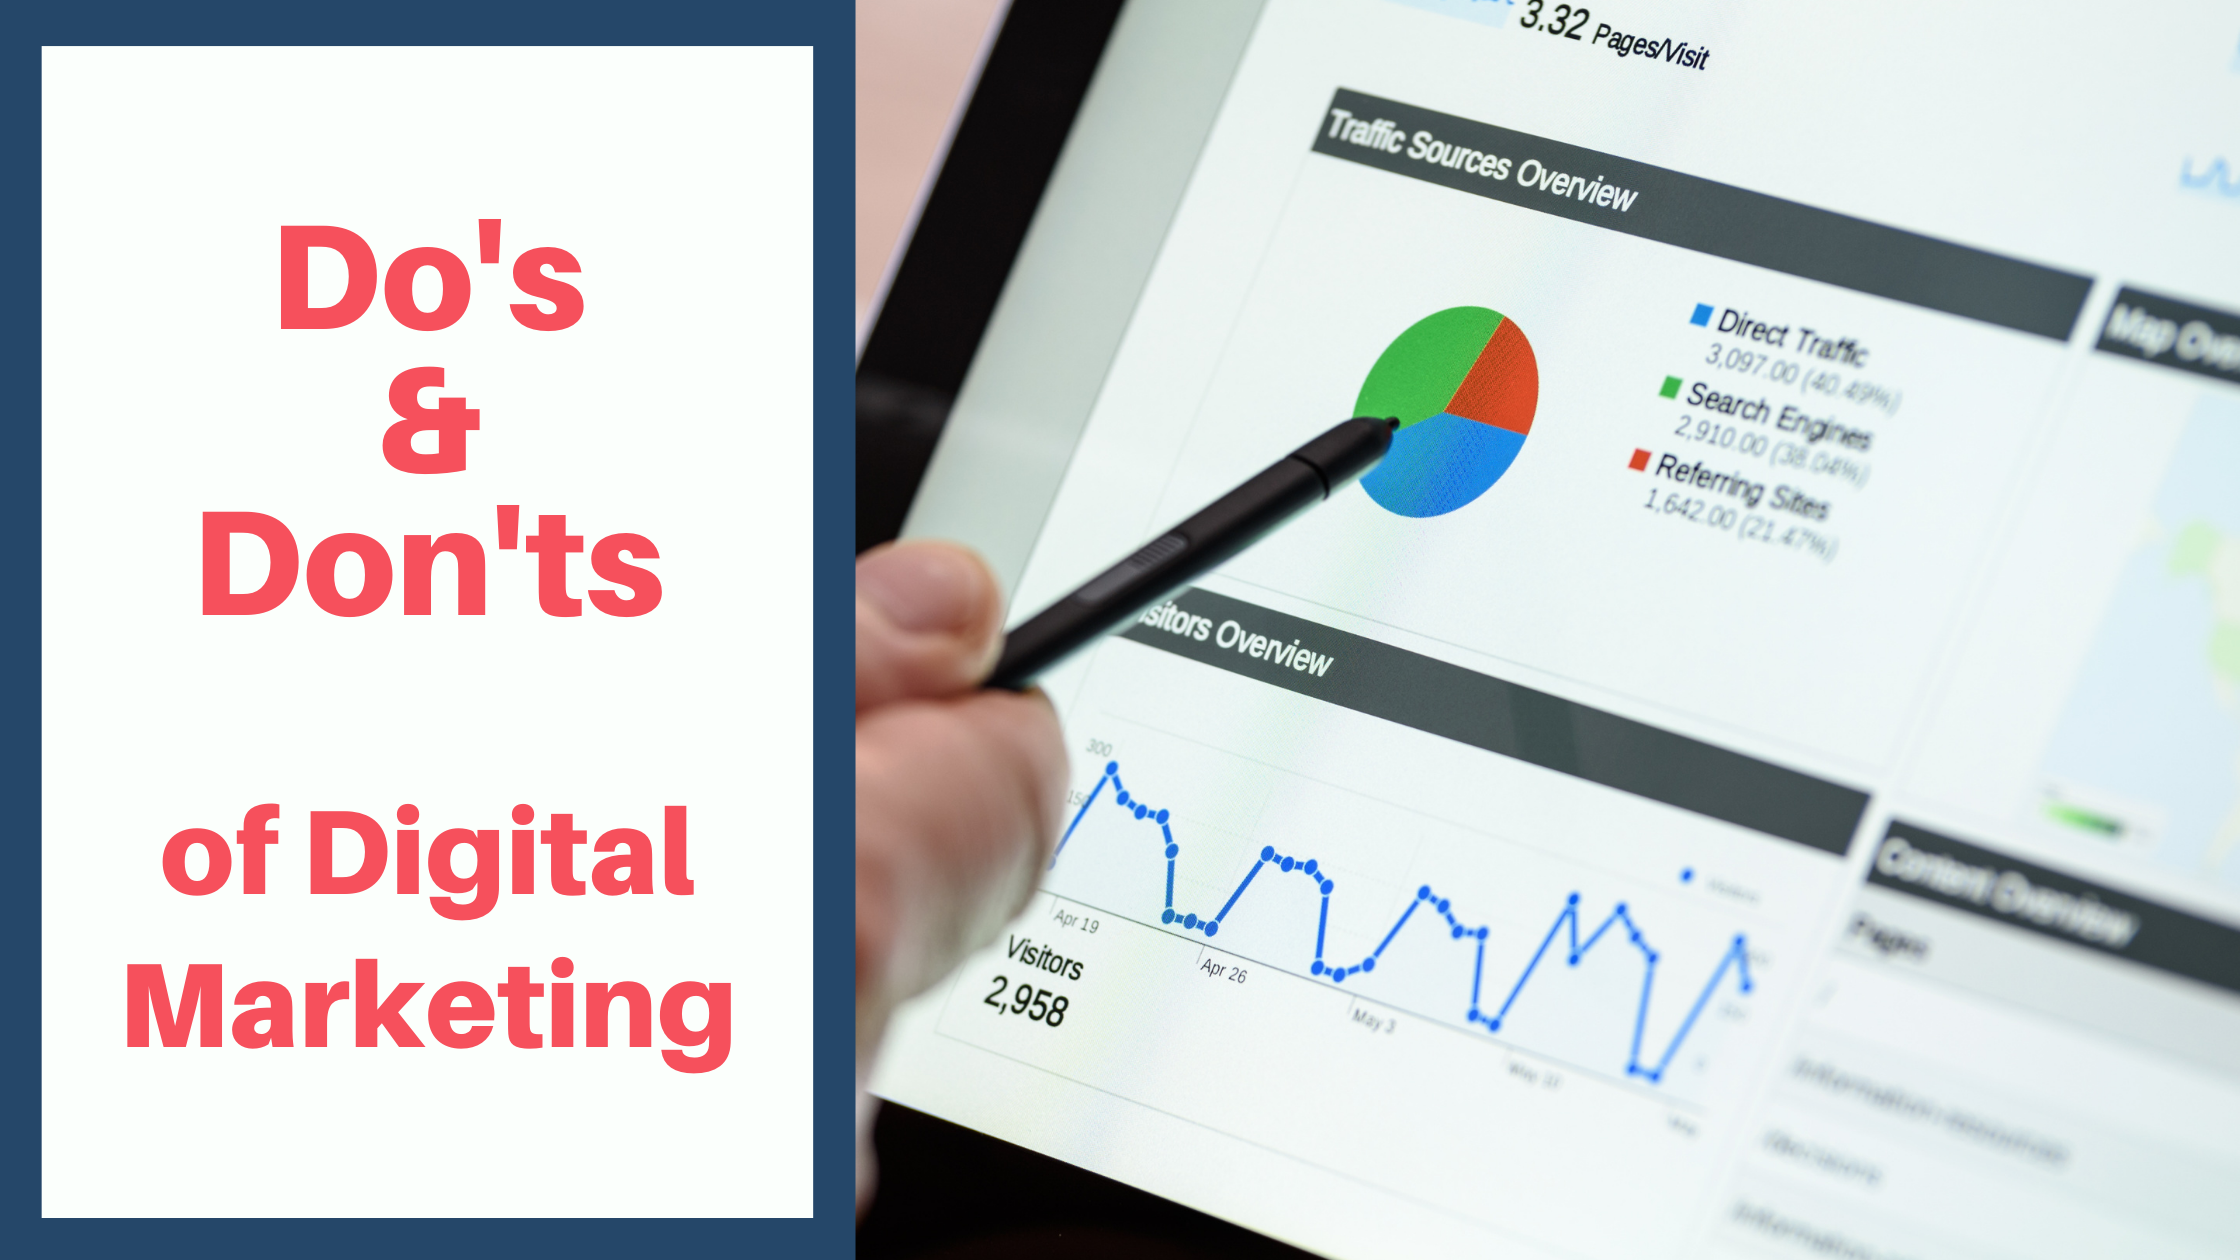 What are the Dos and Don'ts of a Digital Marketing Agency?